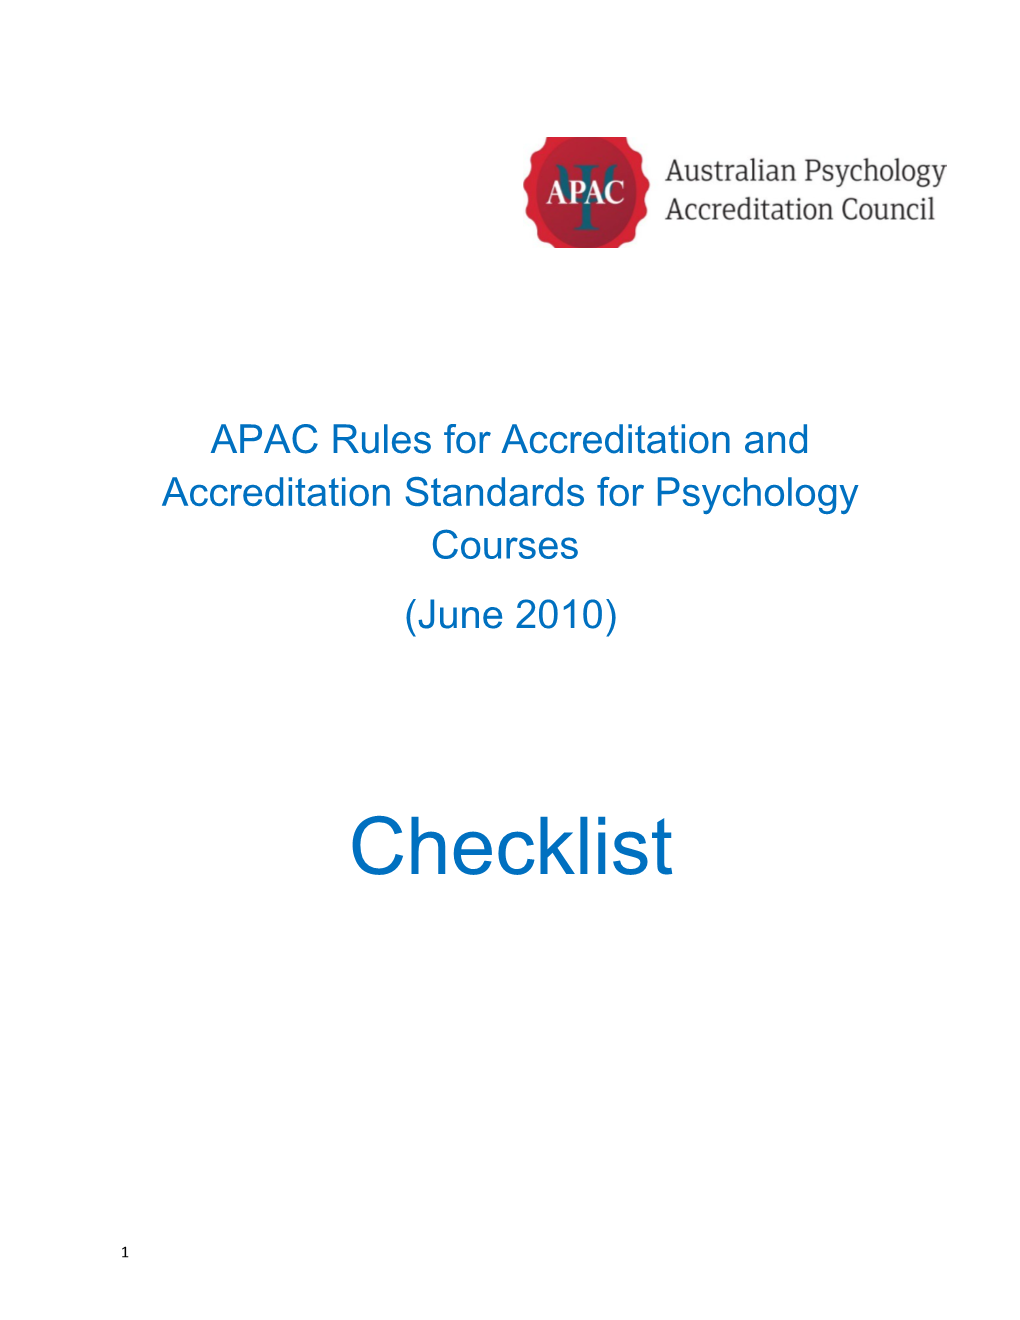 APAC Rules for Accreditation and Accreditation Standards for Psychology Courses